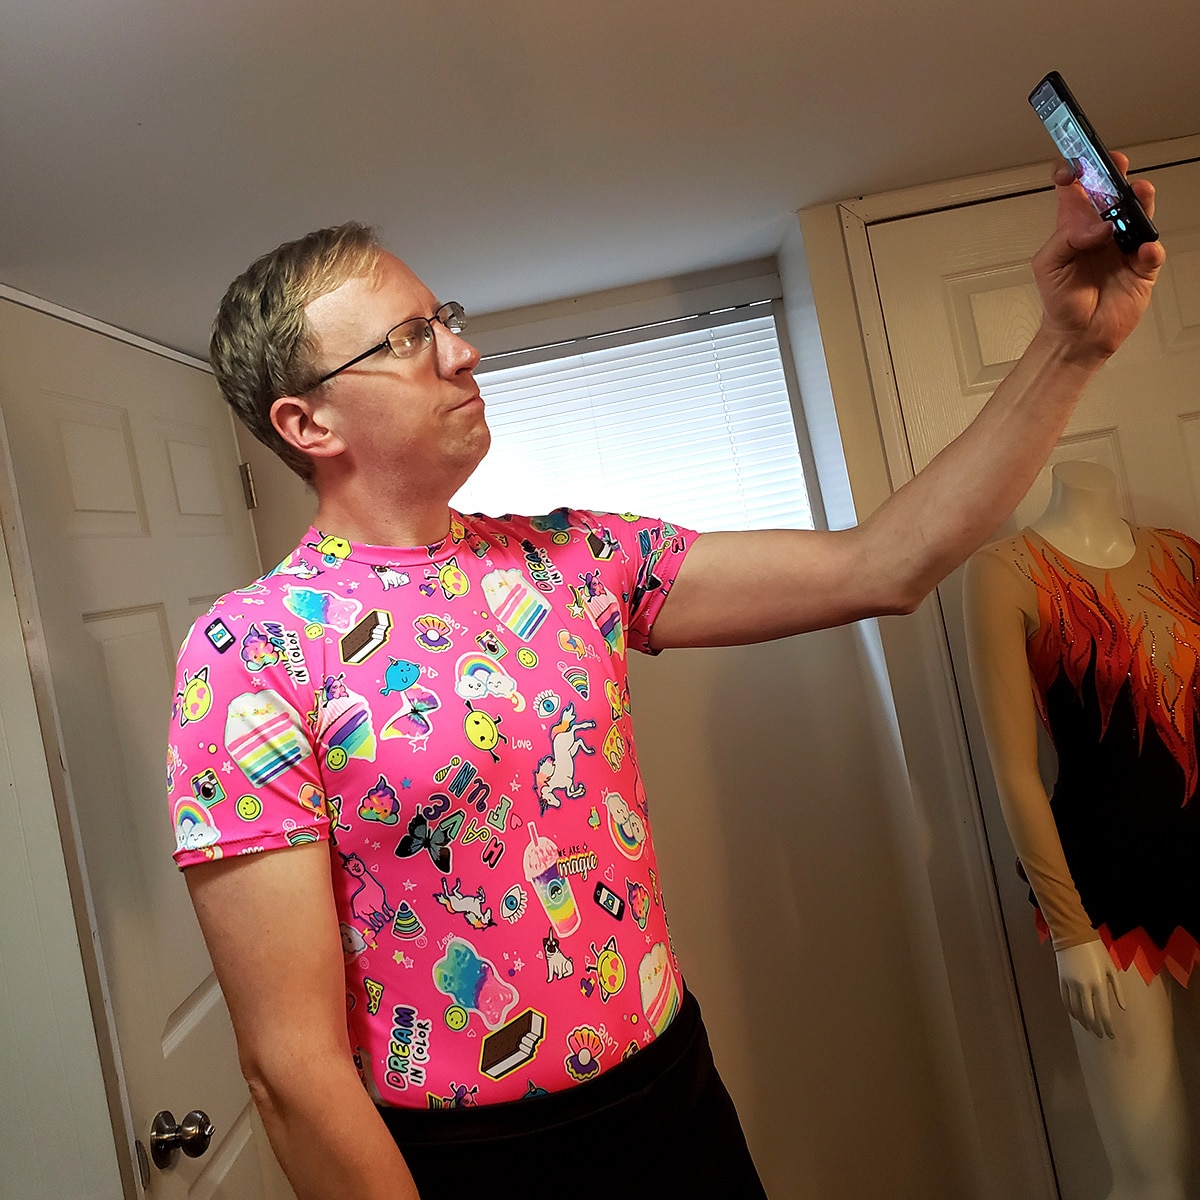 A middle aged man in a bright pink patterned figure skating costume takes a selfie.